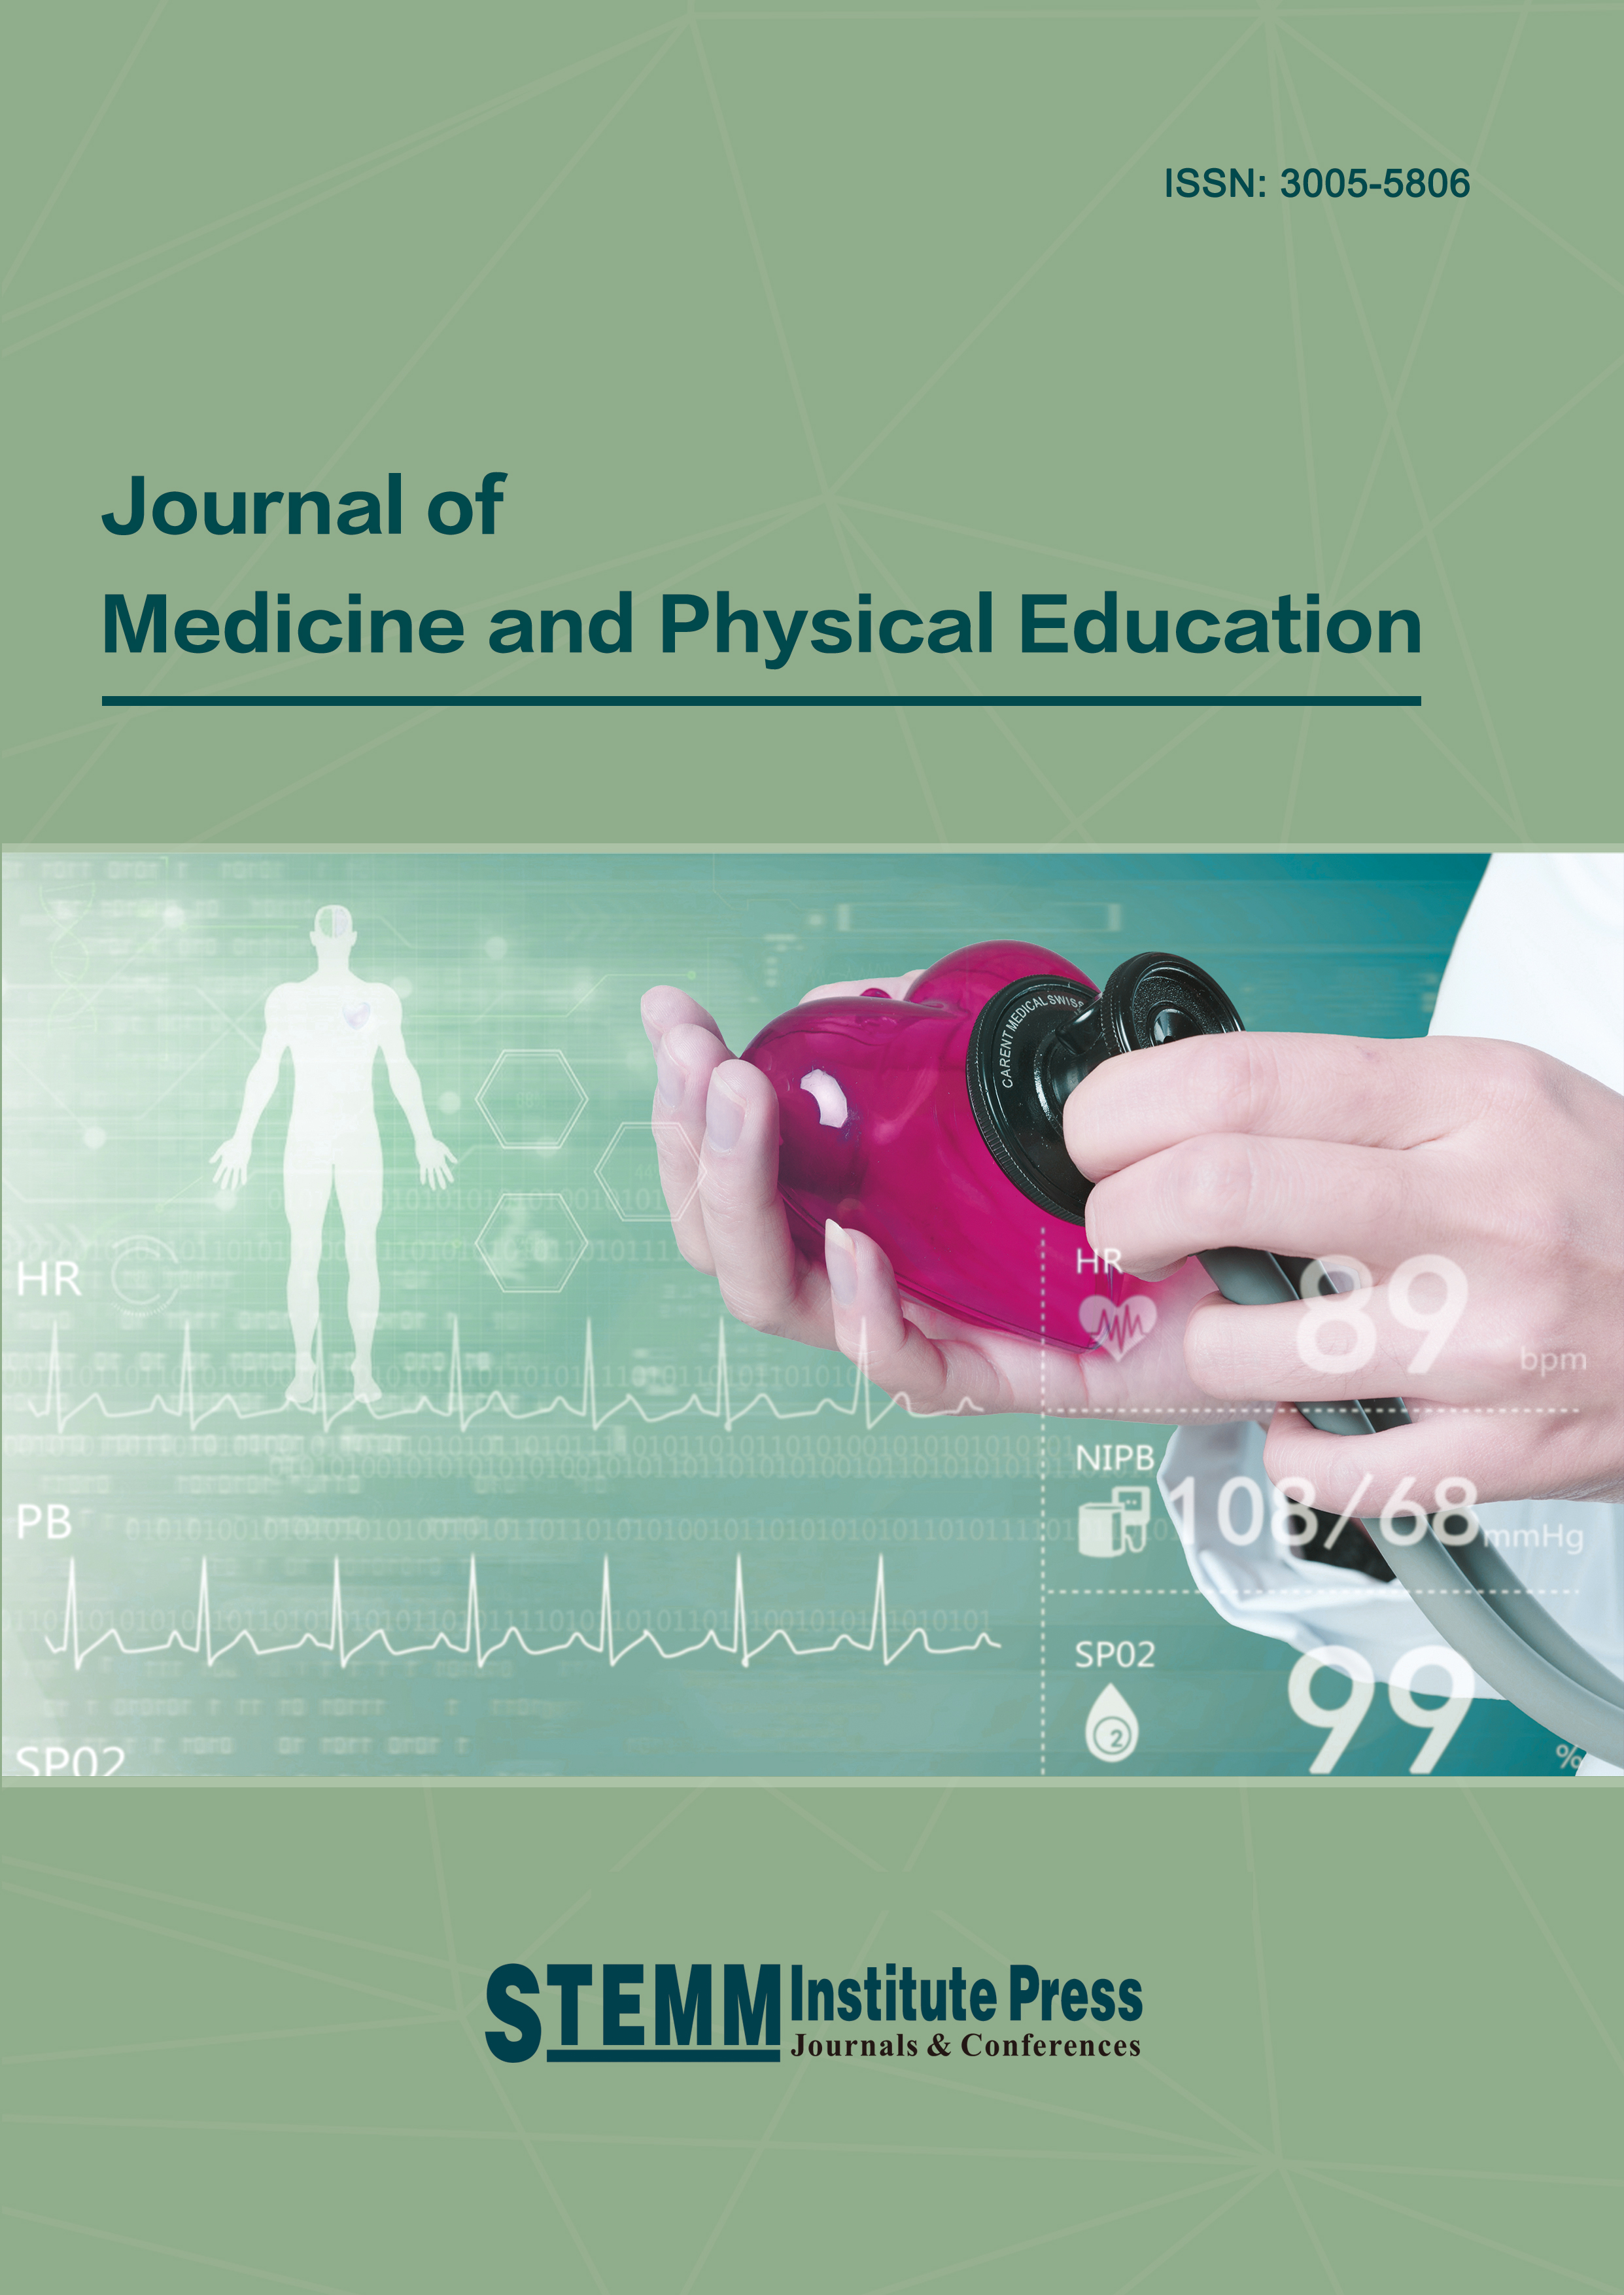 Journal of Medicine and Physical Education.jpg